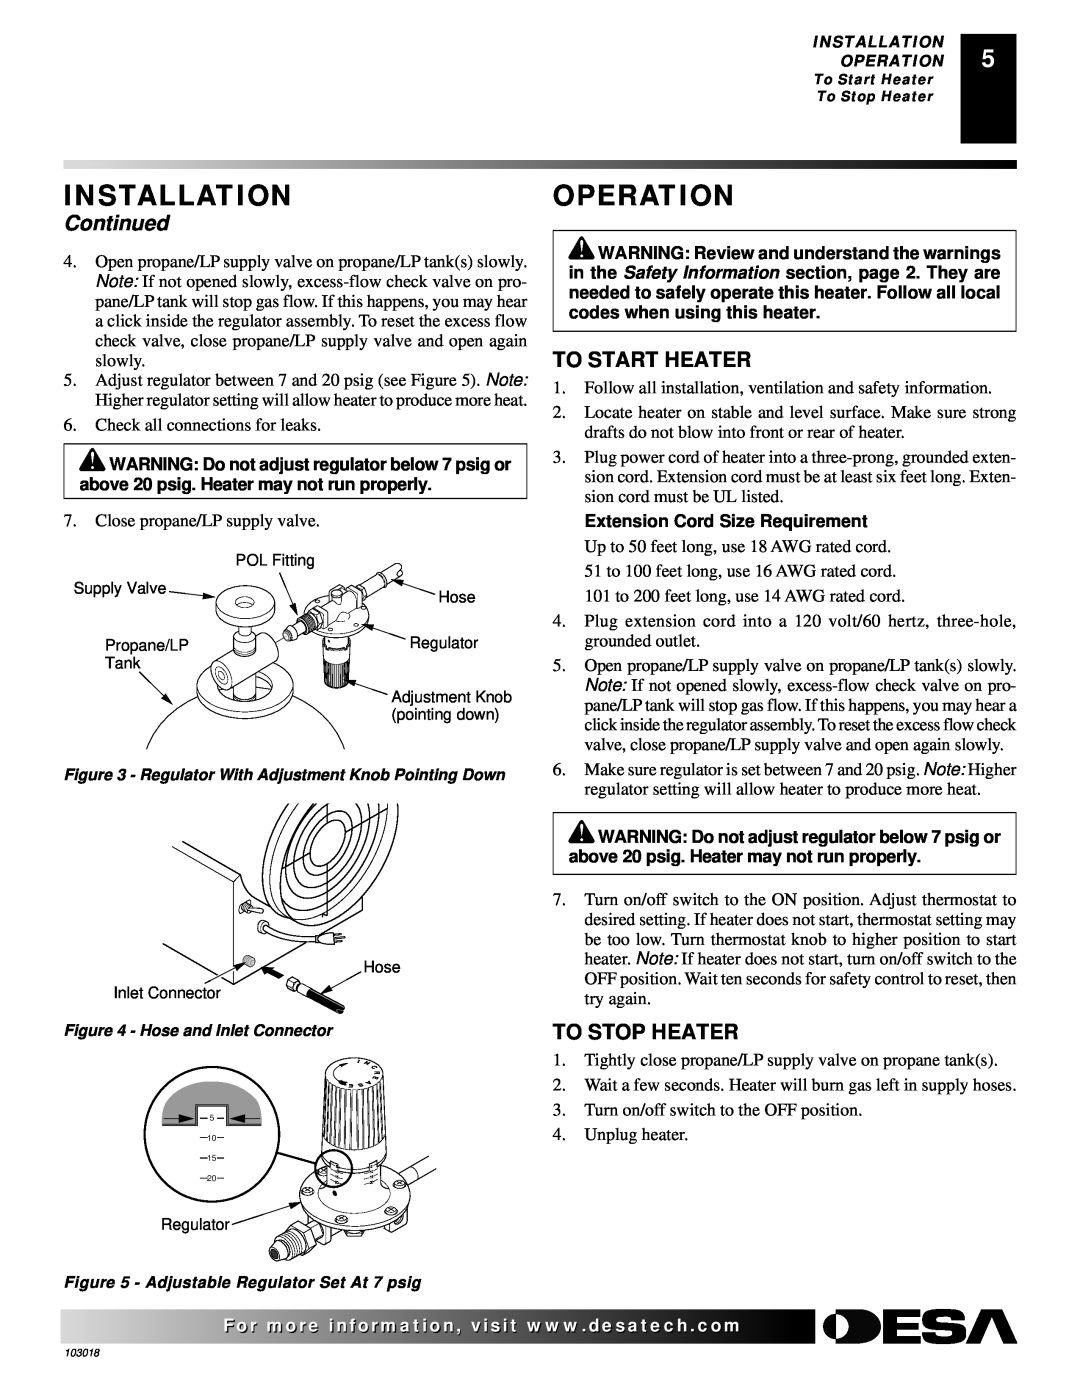 Desa AT Series owner manual Operation, Installation, Continued, To Start Heater, To Stop Heater 